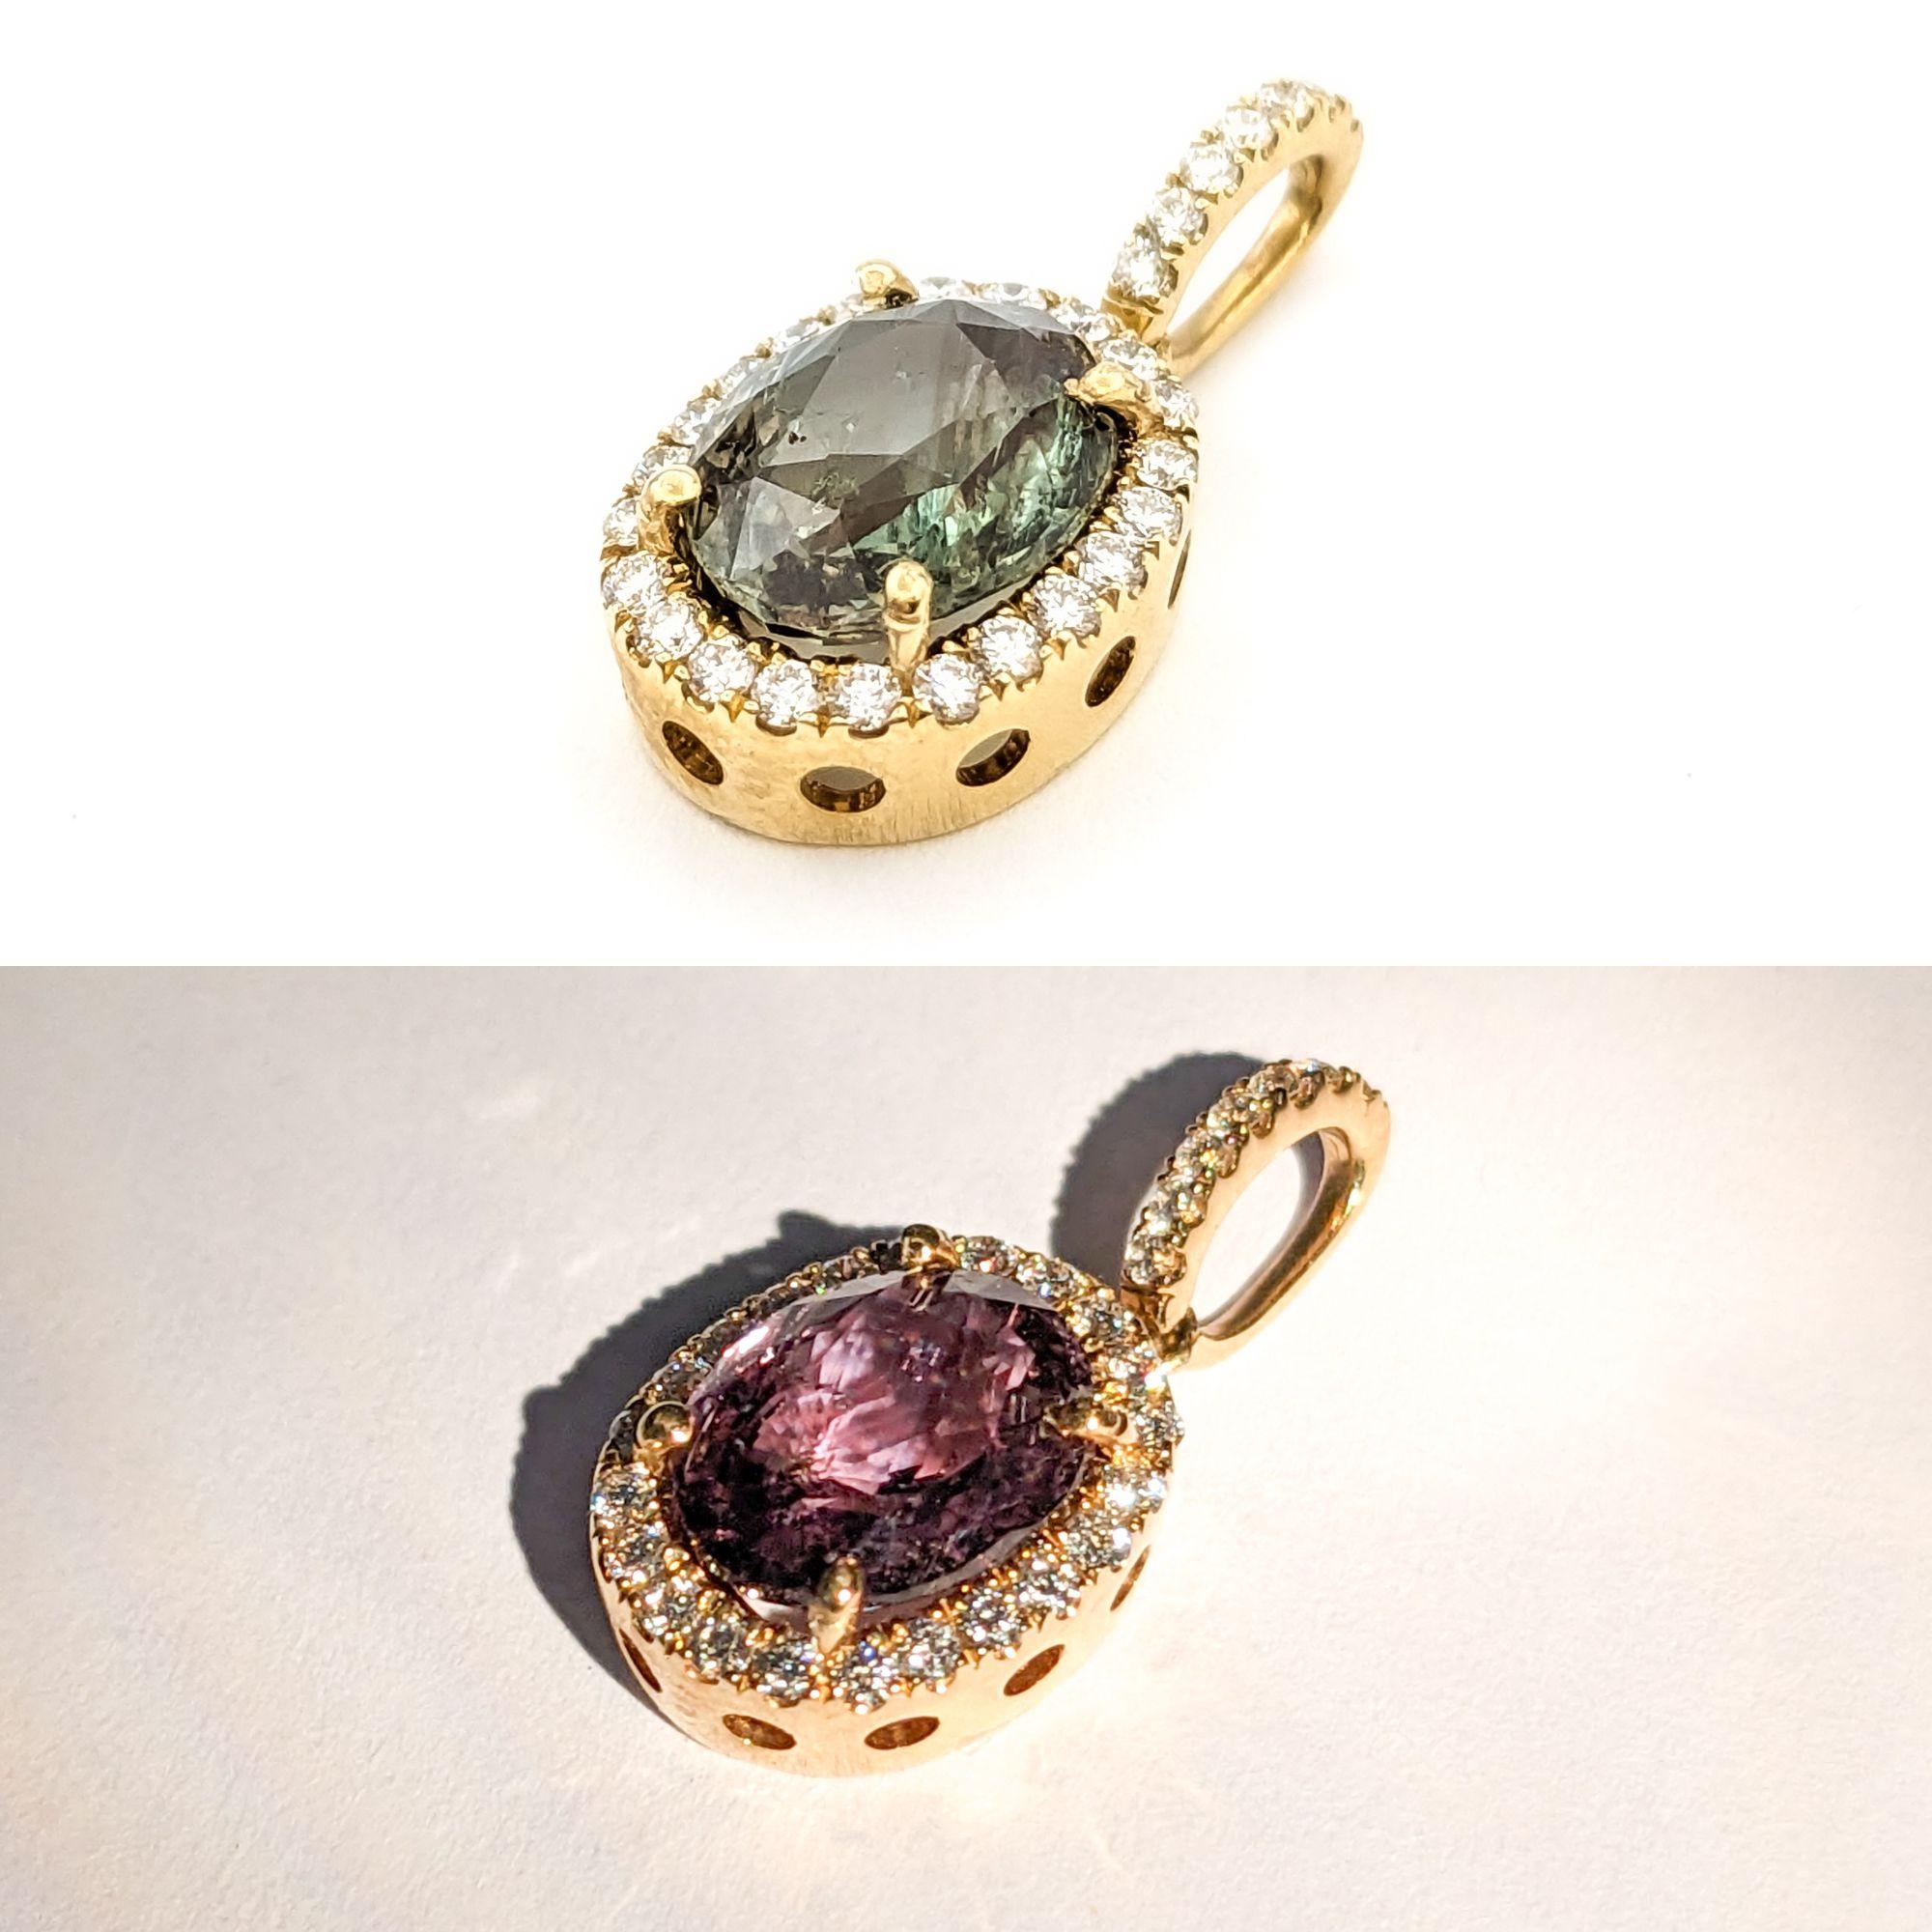 Enchanting 1.83ct Natural Alexandrite & Diamond Pendant Necklace

Introducing this exquisite pendant, meticulously crafted in 14k yellow gold adorned with .20ctw of dazzling round diamonds. The diamonds, known for their sparkling brilliance,